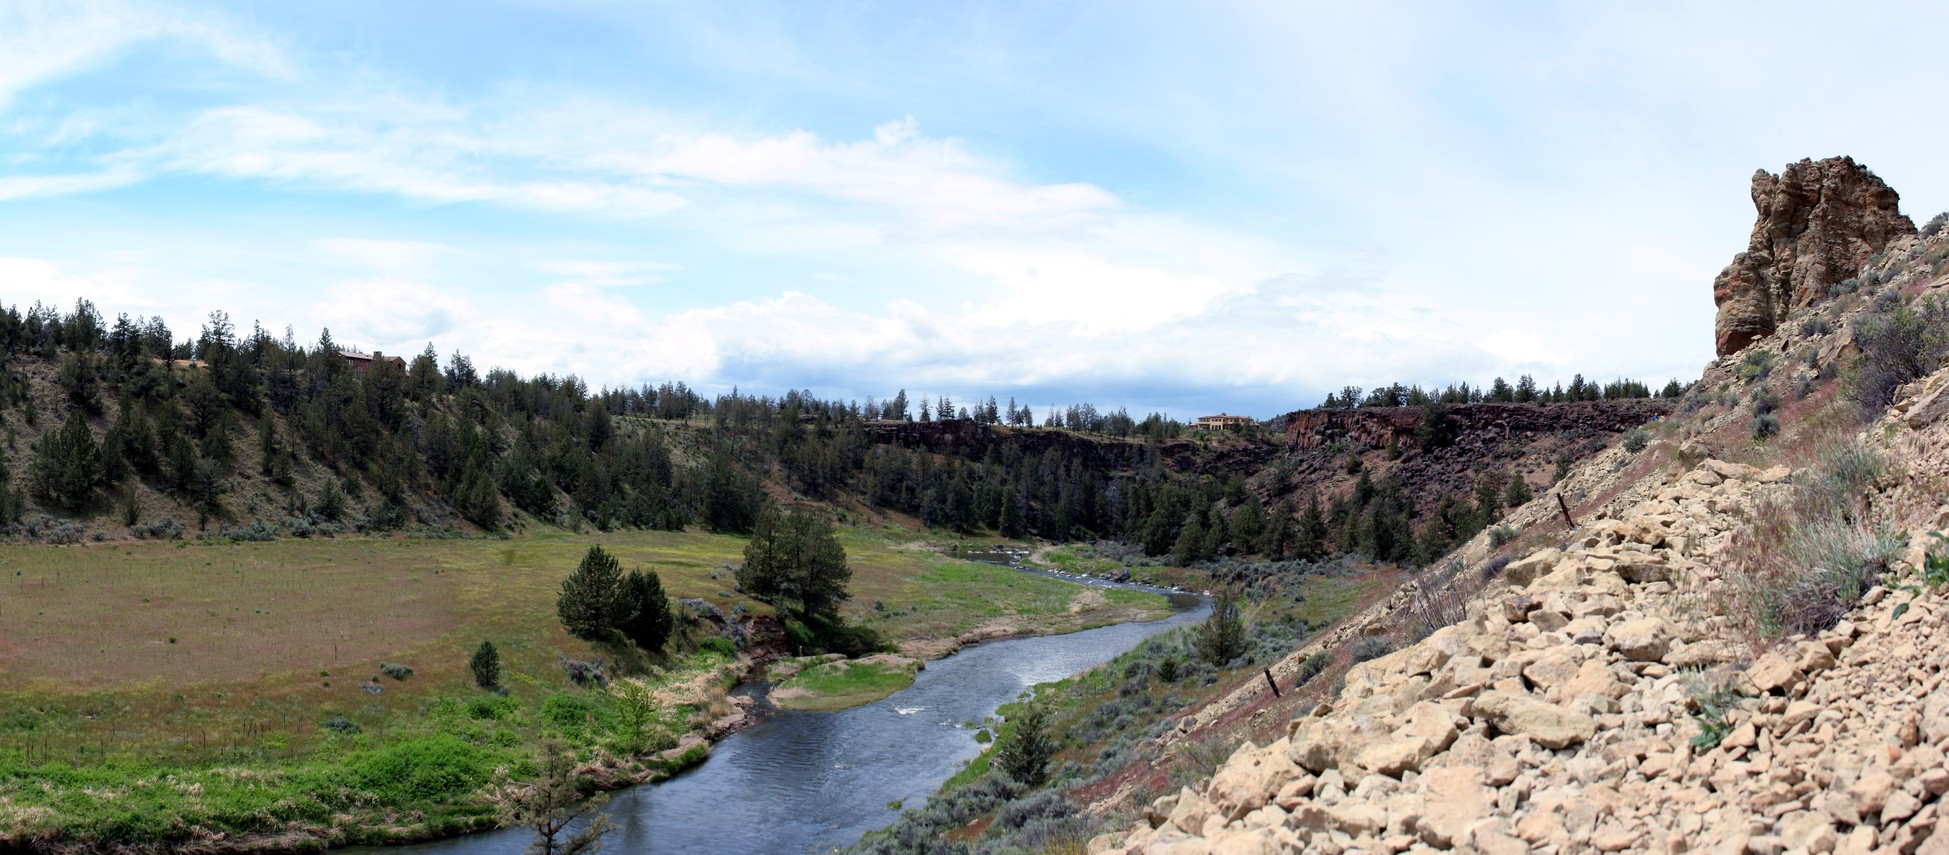 [Crooked River Gorge]